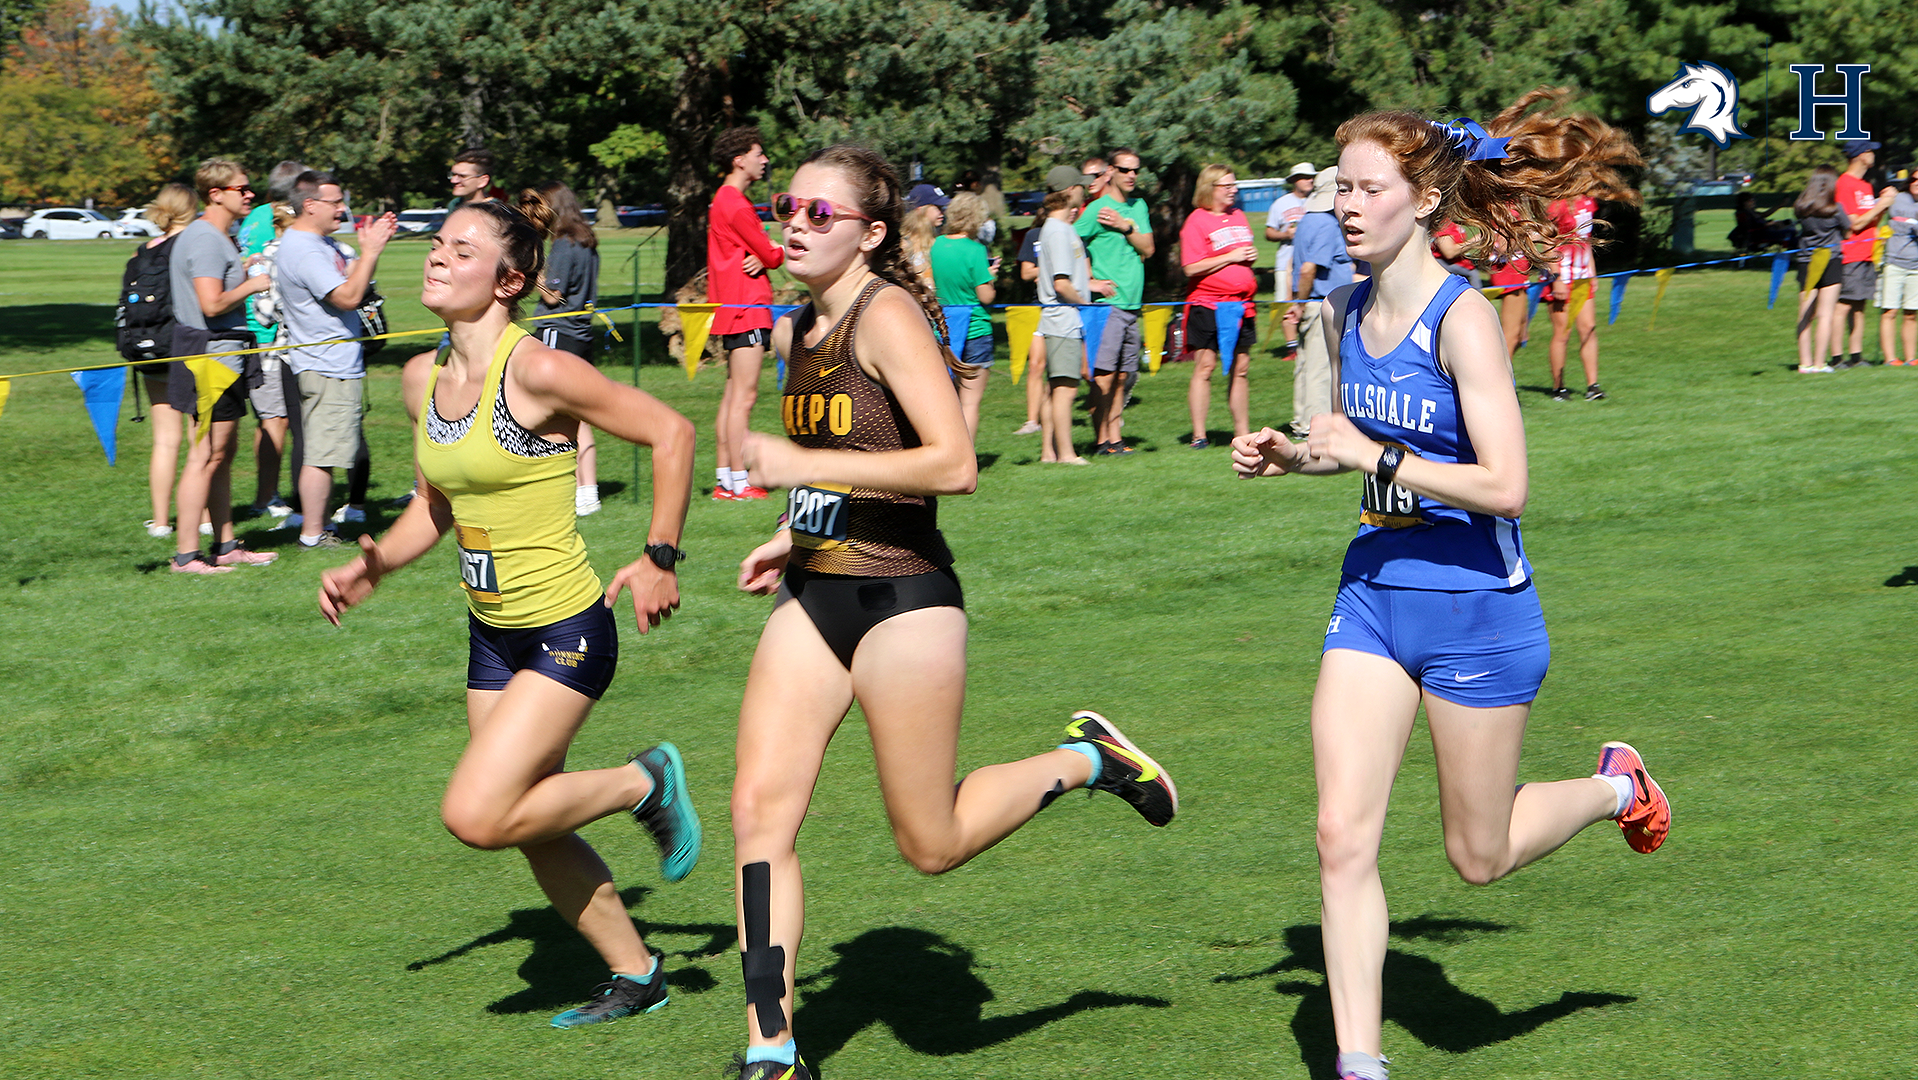 Charger women competitive against Division I squads in Joe Piane Invite